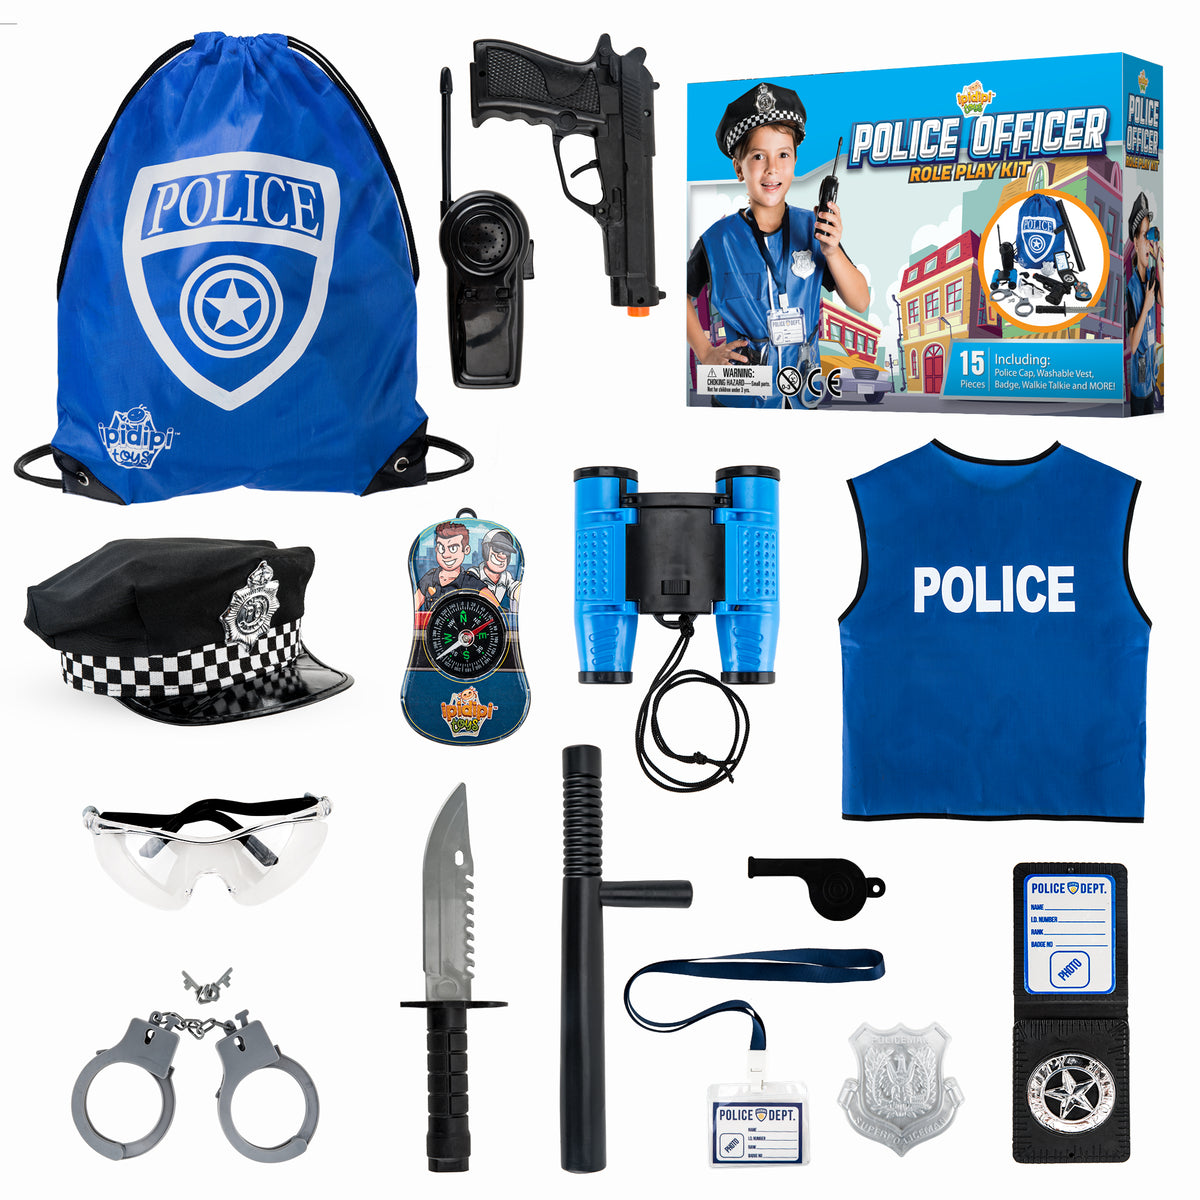 Police Officer Role Play Kit - 15 Piece Policeman Pretend Play Set